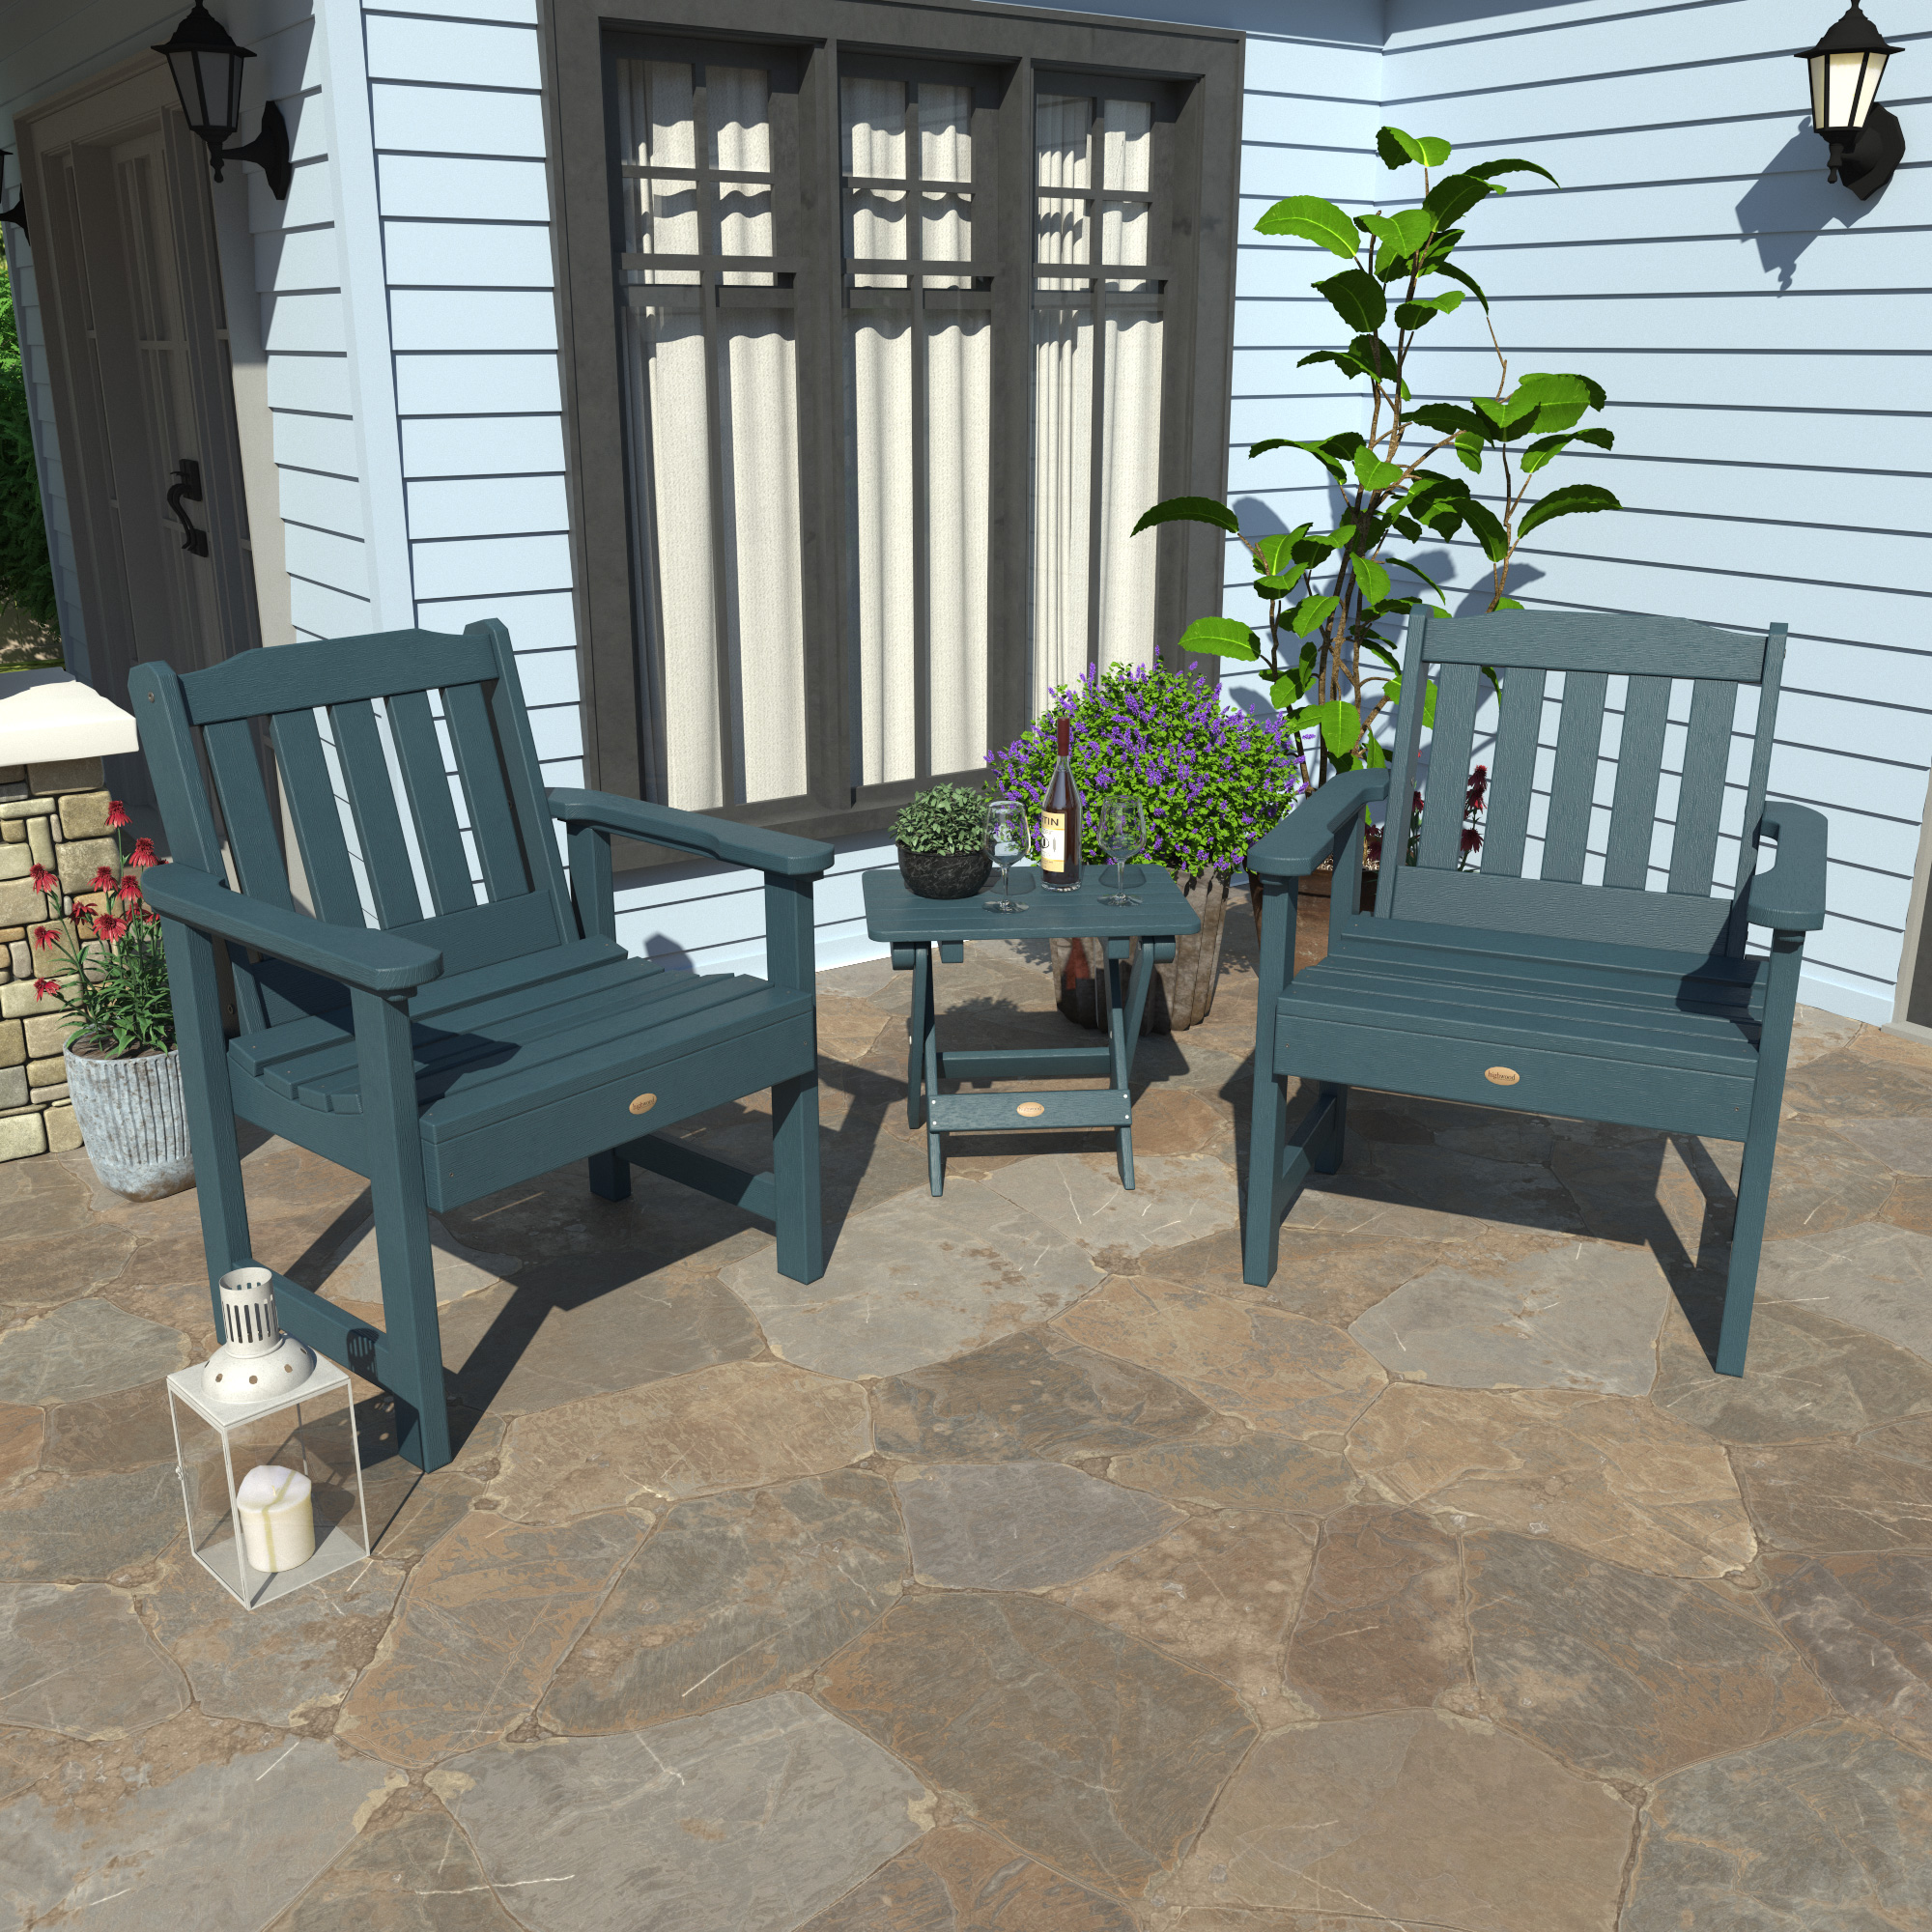 Highwood 3pc Lehigh Garden Chair Set with 1 Folding Adirondack Side Table - image 2 of 6